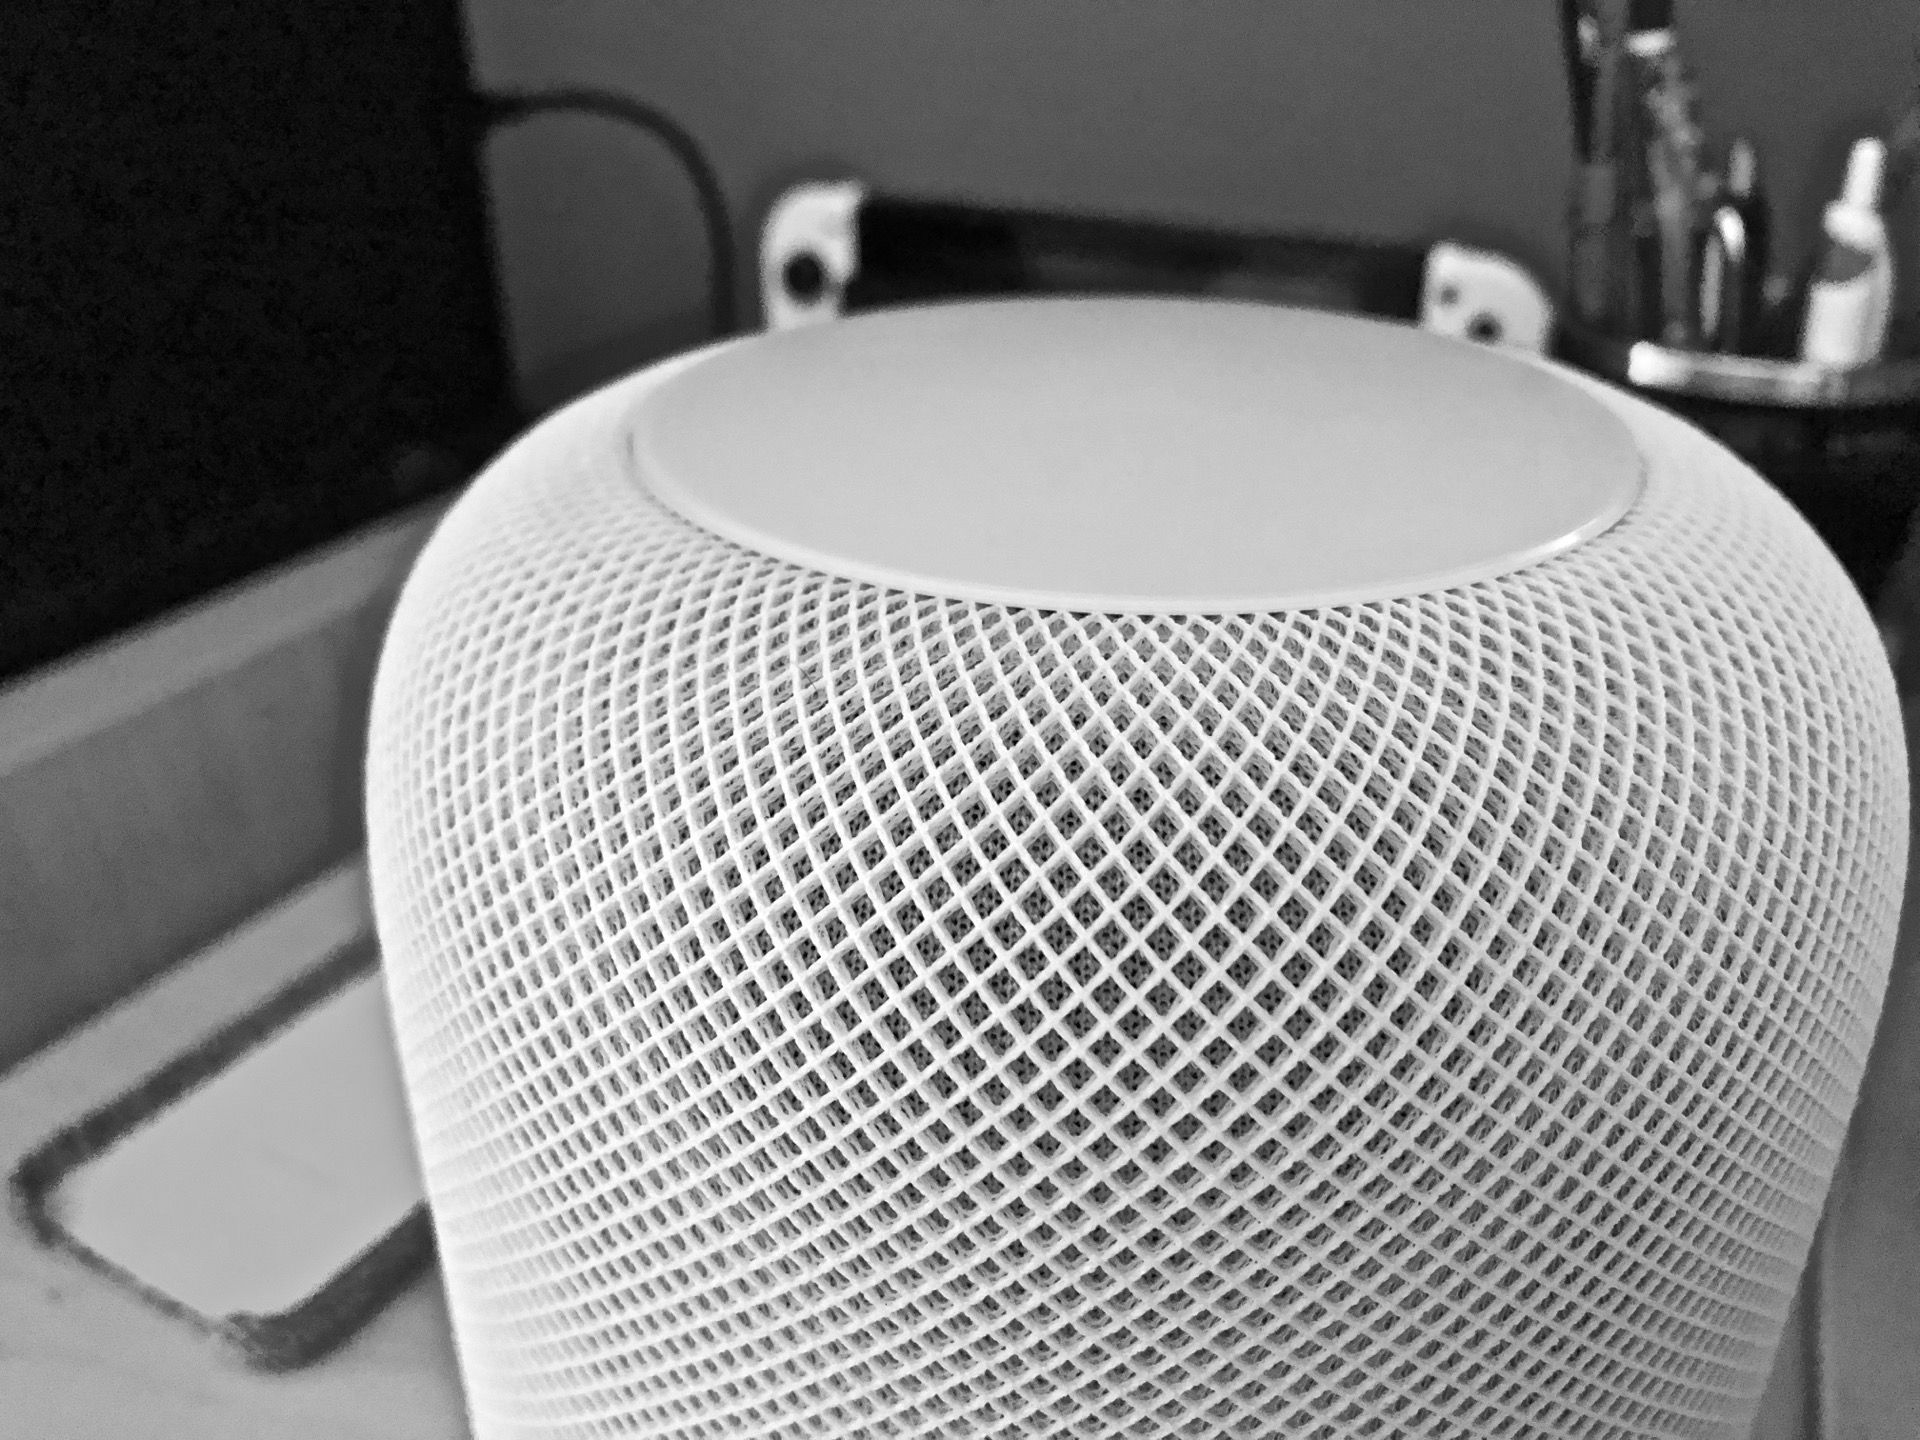 HomePod: The BirchTree Review